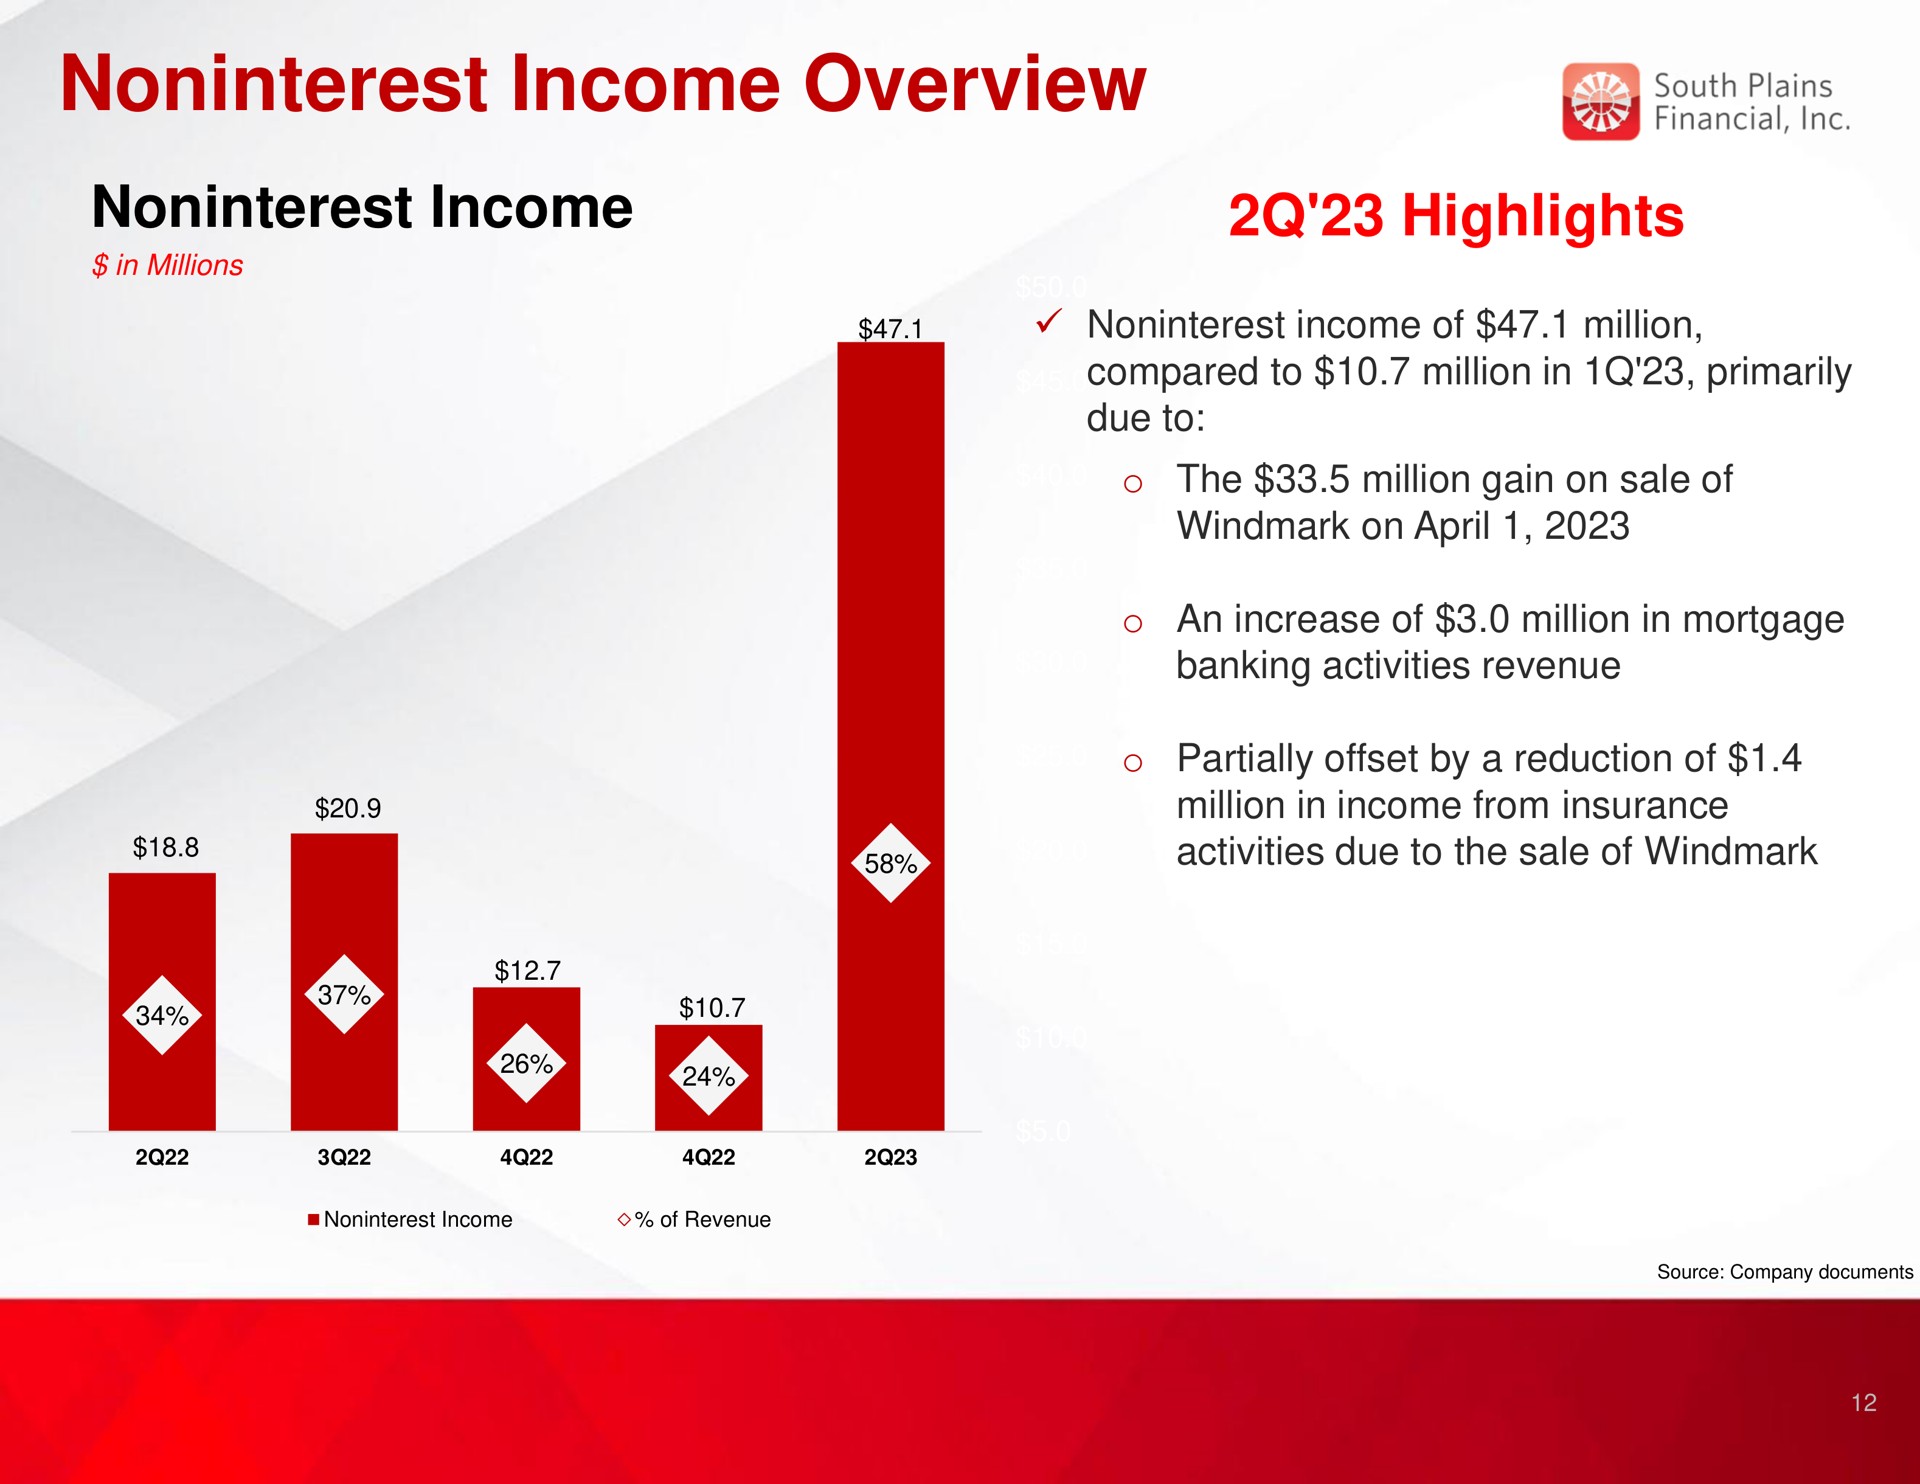 income overview income highlights south plains a as | South Plains Financial